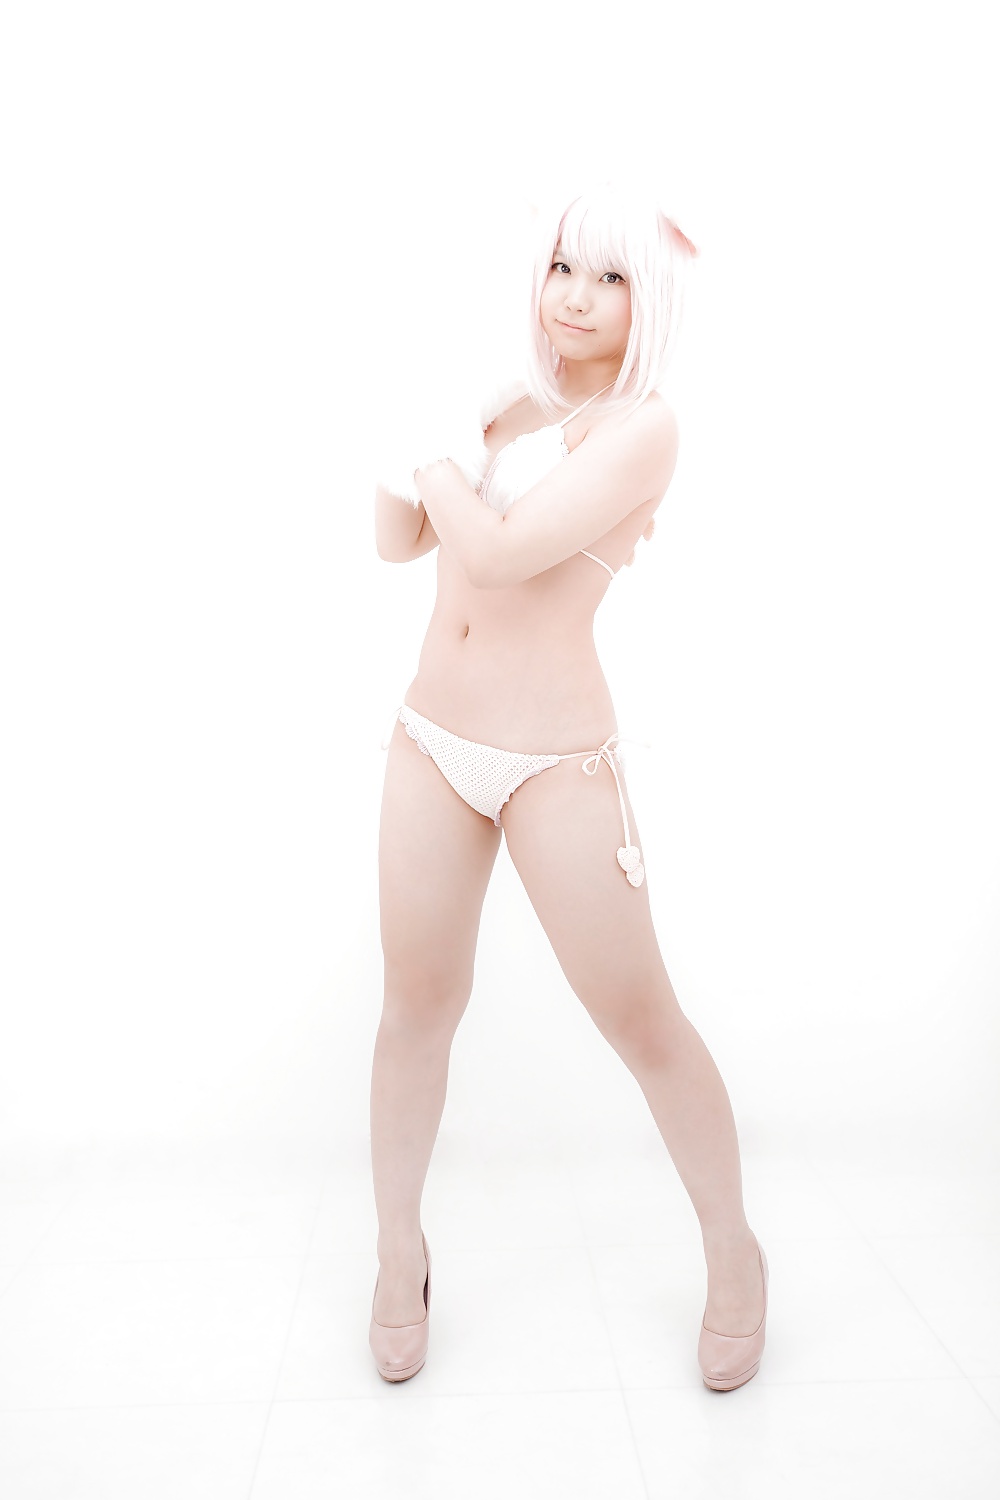 Asiatica cosplay in bianco
 #26558944